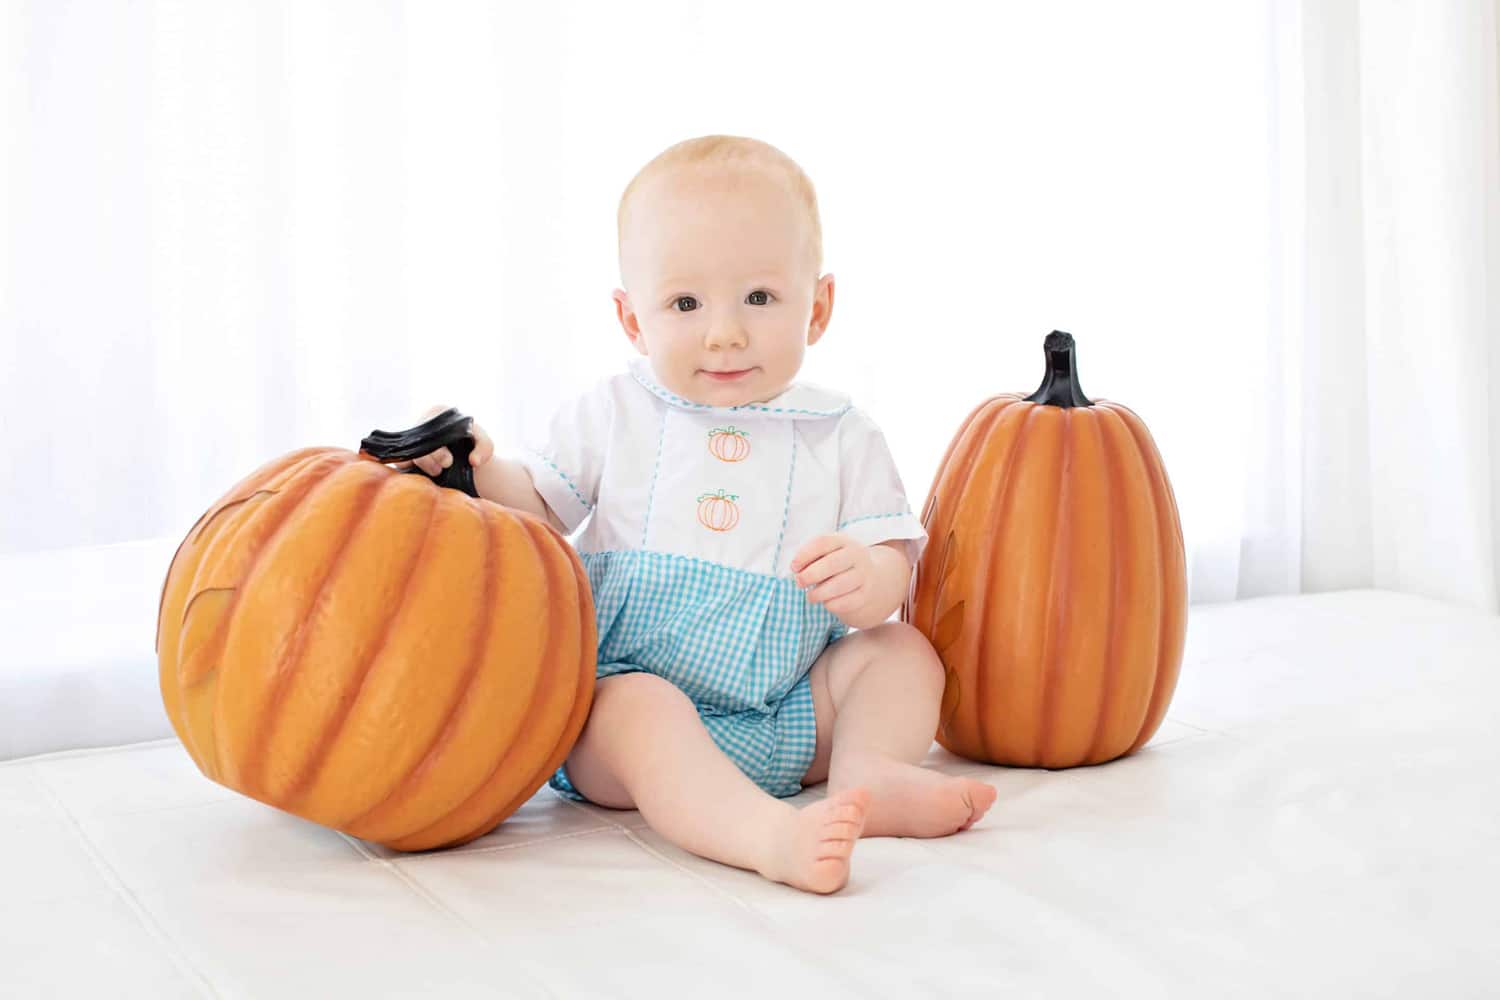 A baby takes a photo with two pumpkins.